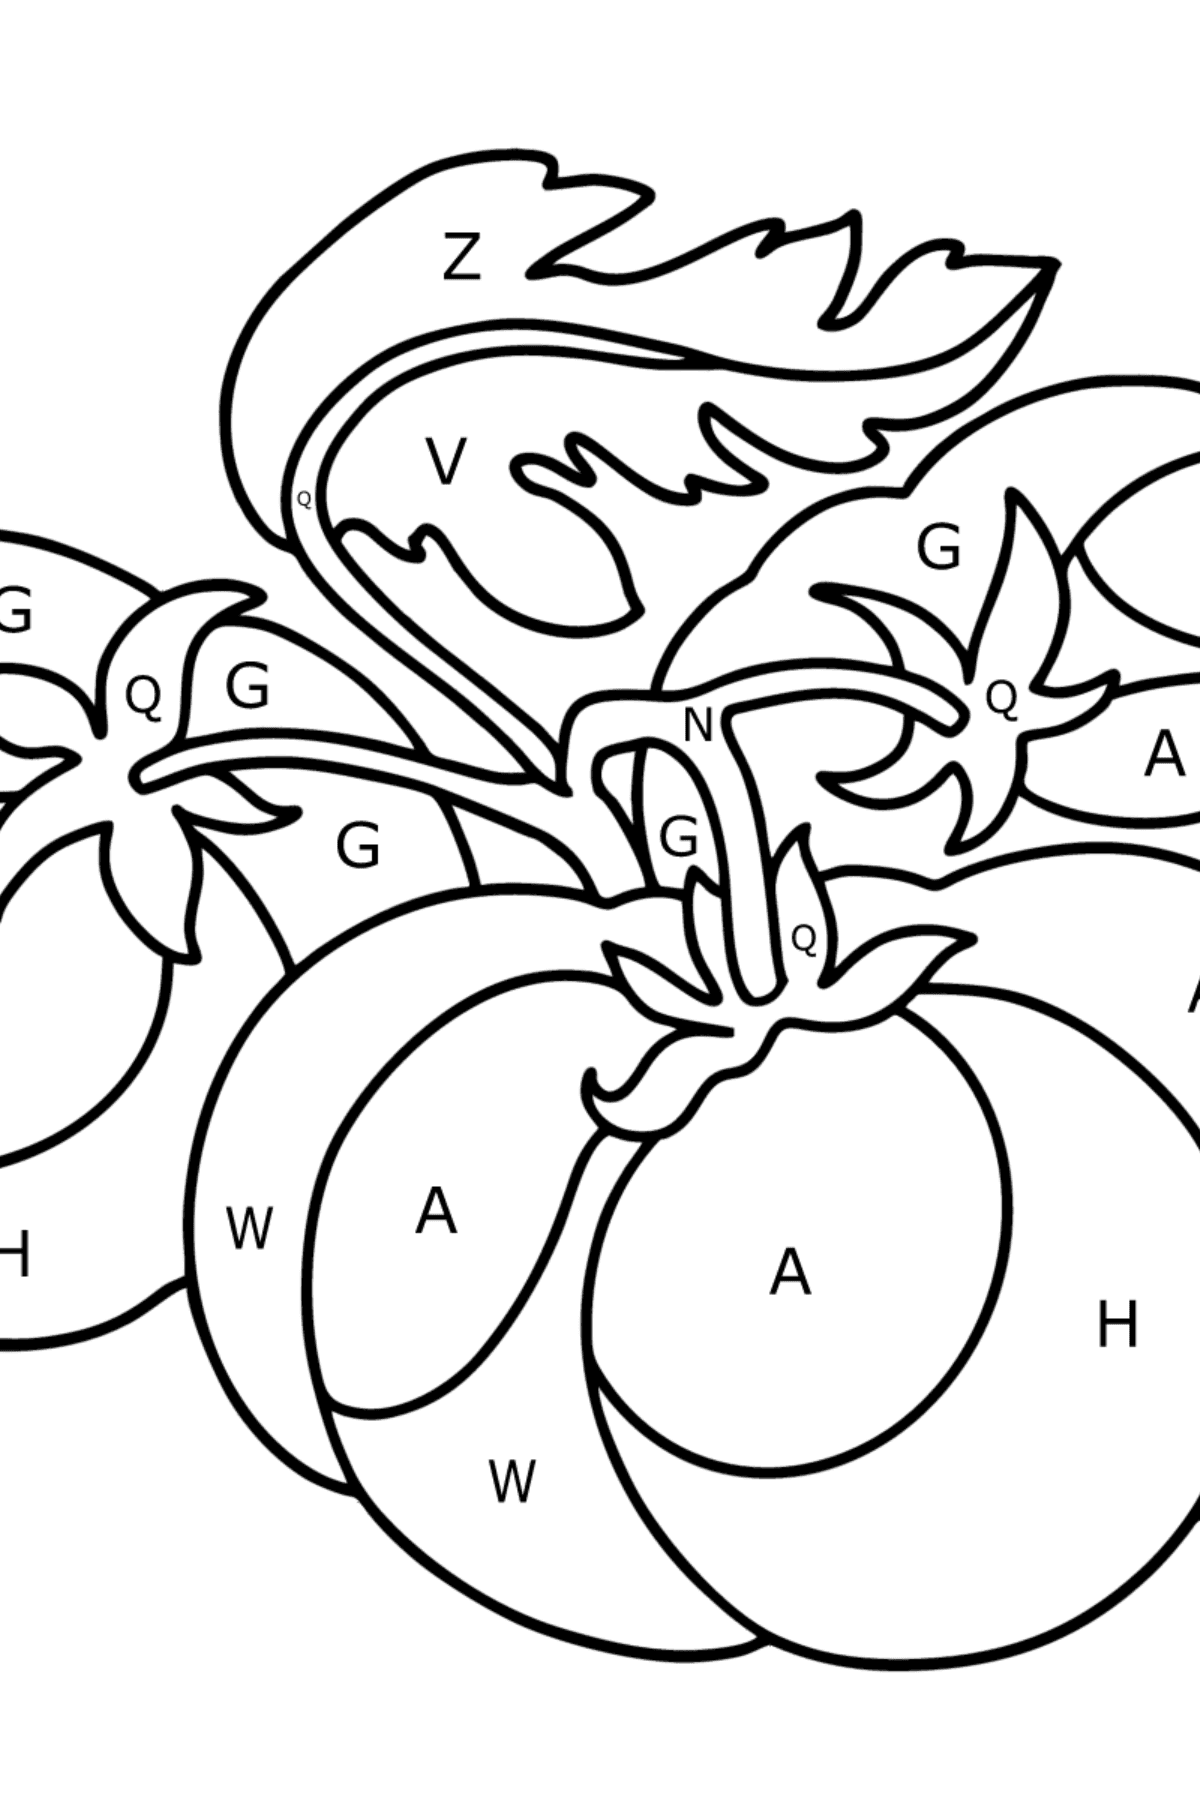 Large tomatoes сoloring page - Coloring by Letters for Kids